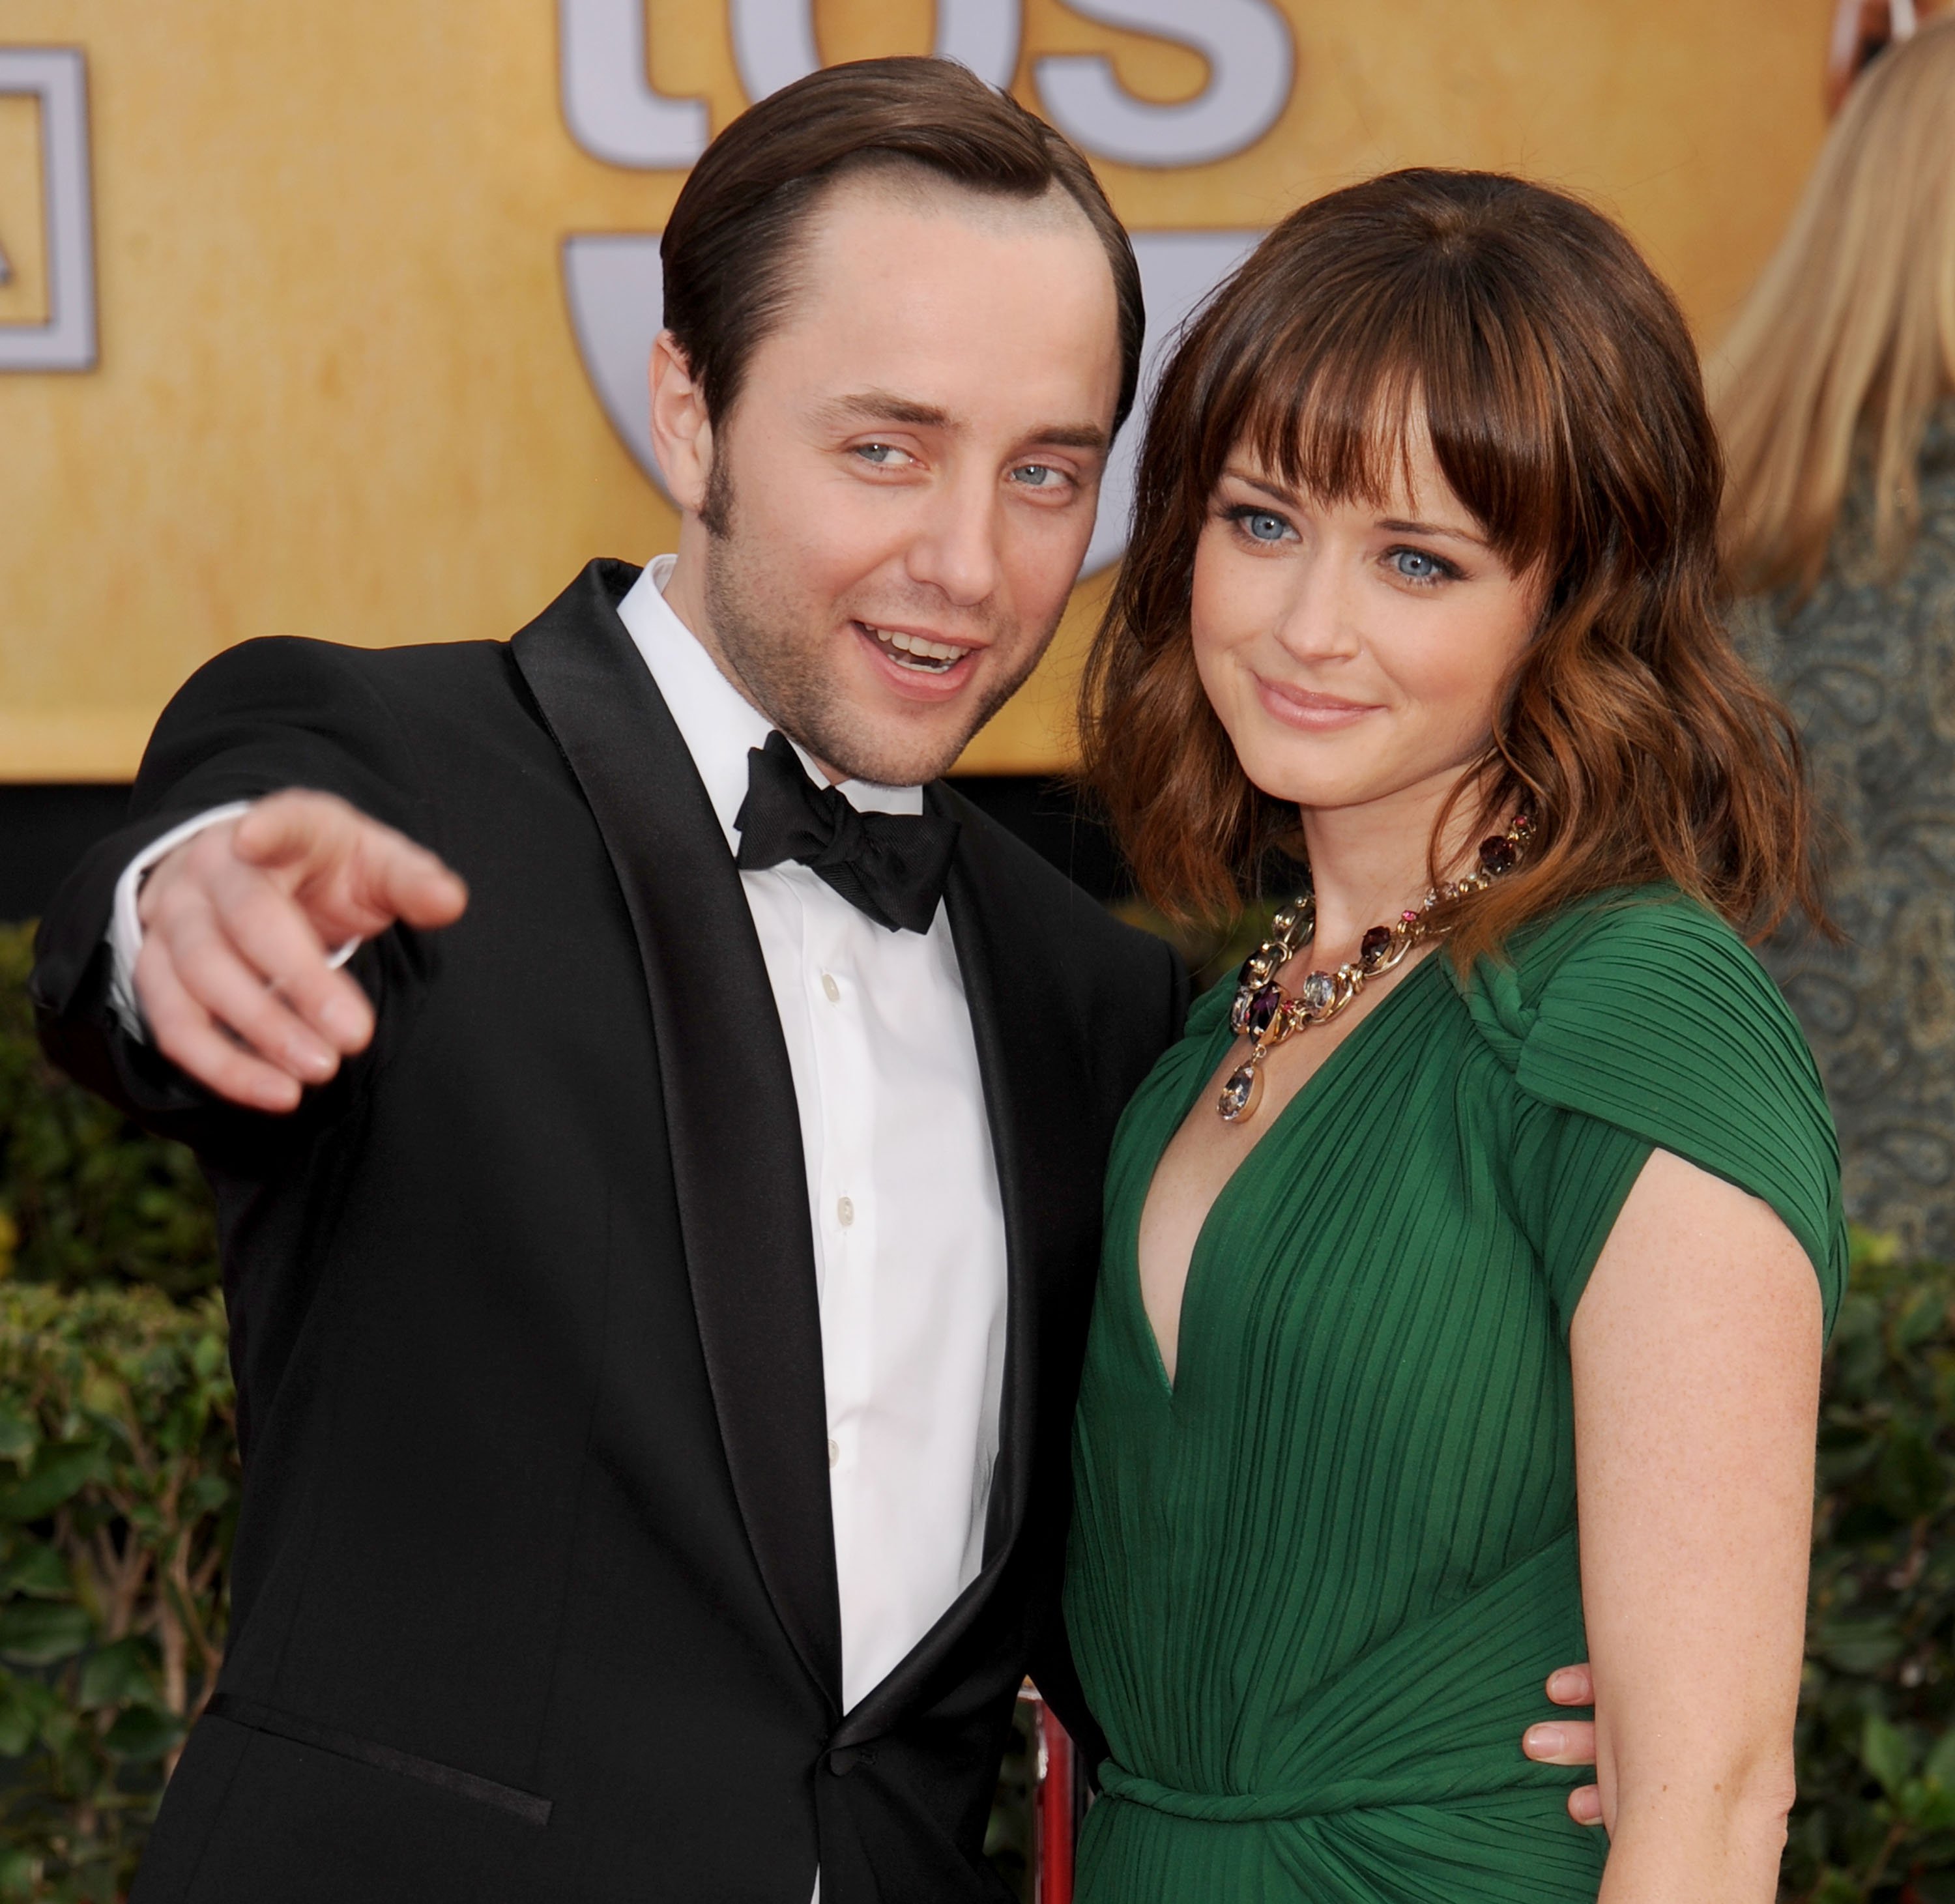 Vincent Kartheiser and Alexis Bledel arrive at the 19th Annual Screen Actors Guild Awards at The Shrine Auditorium on January 27, 2013